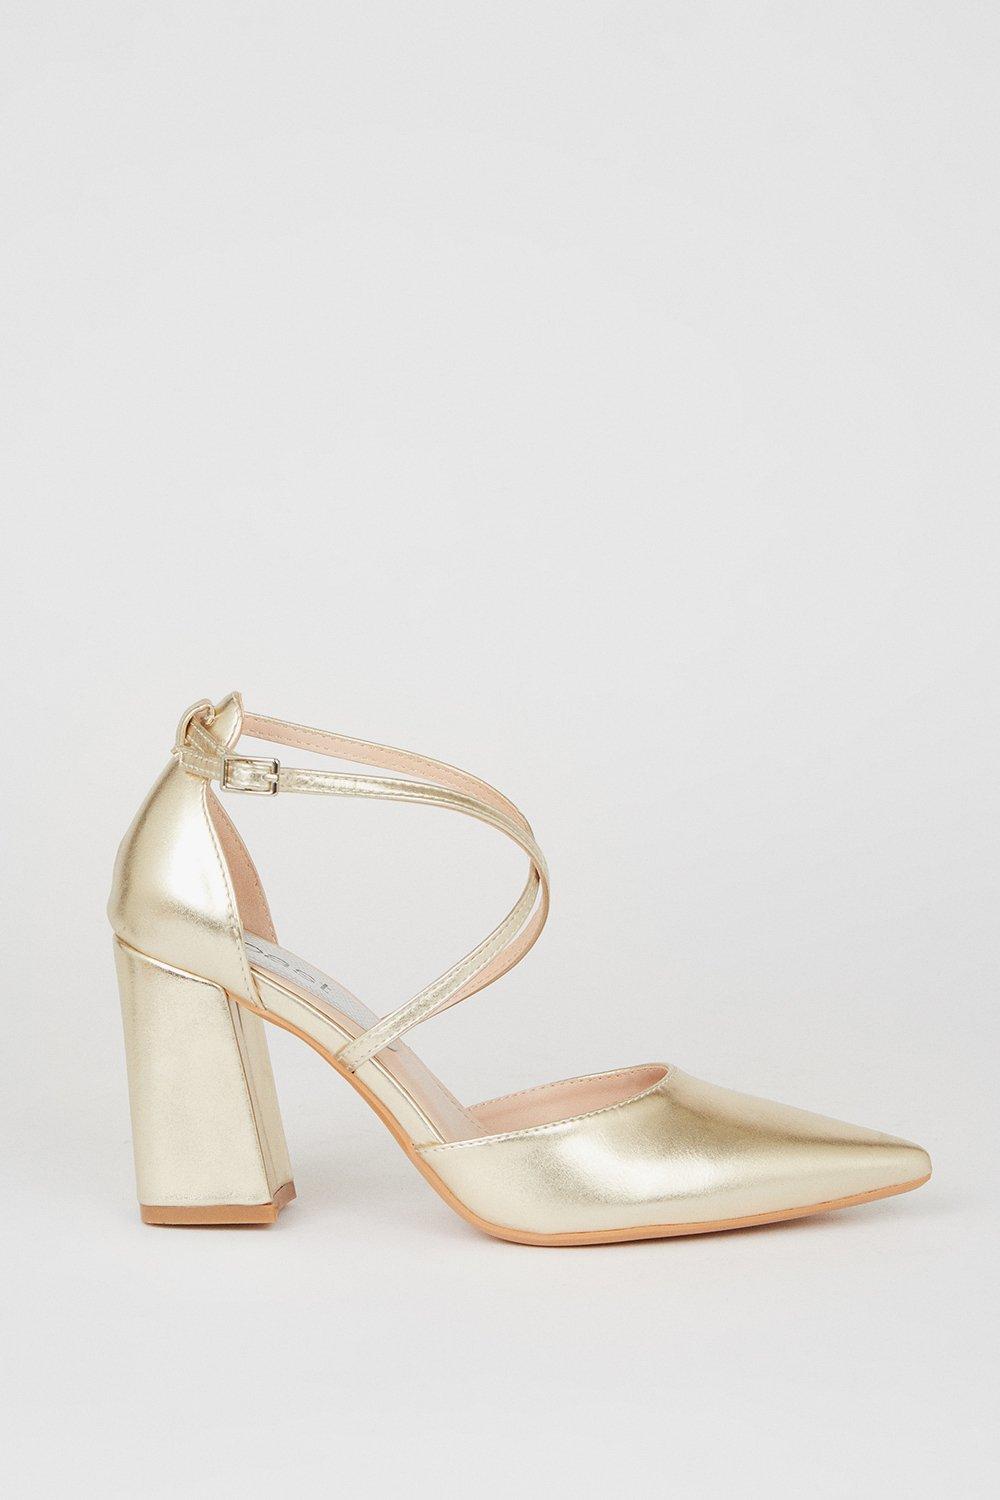 Treat Cross Strap Pointed Block Heel Court Shoes - Champagne